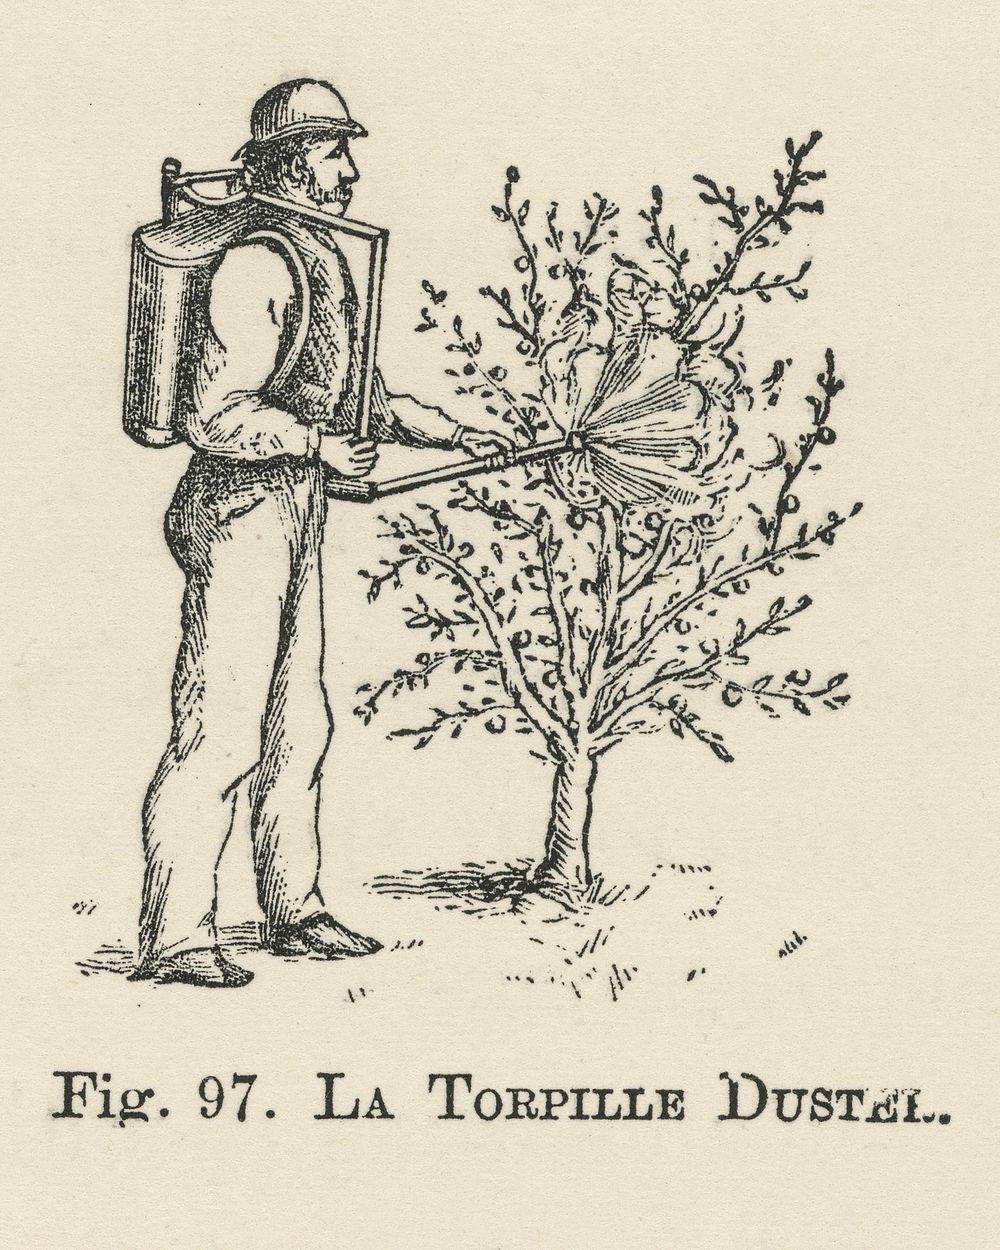 Vintage illustration of la torpille duster digitally enhanced from our own vintage edition of The Fruit Grower's Guide…